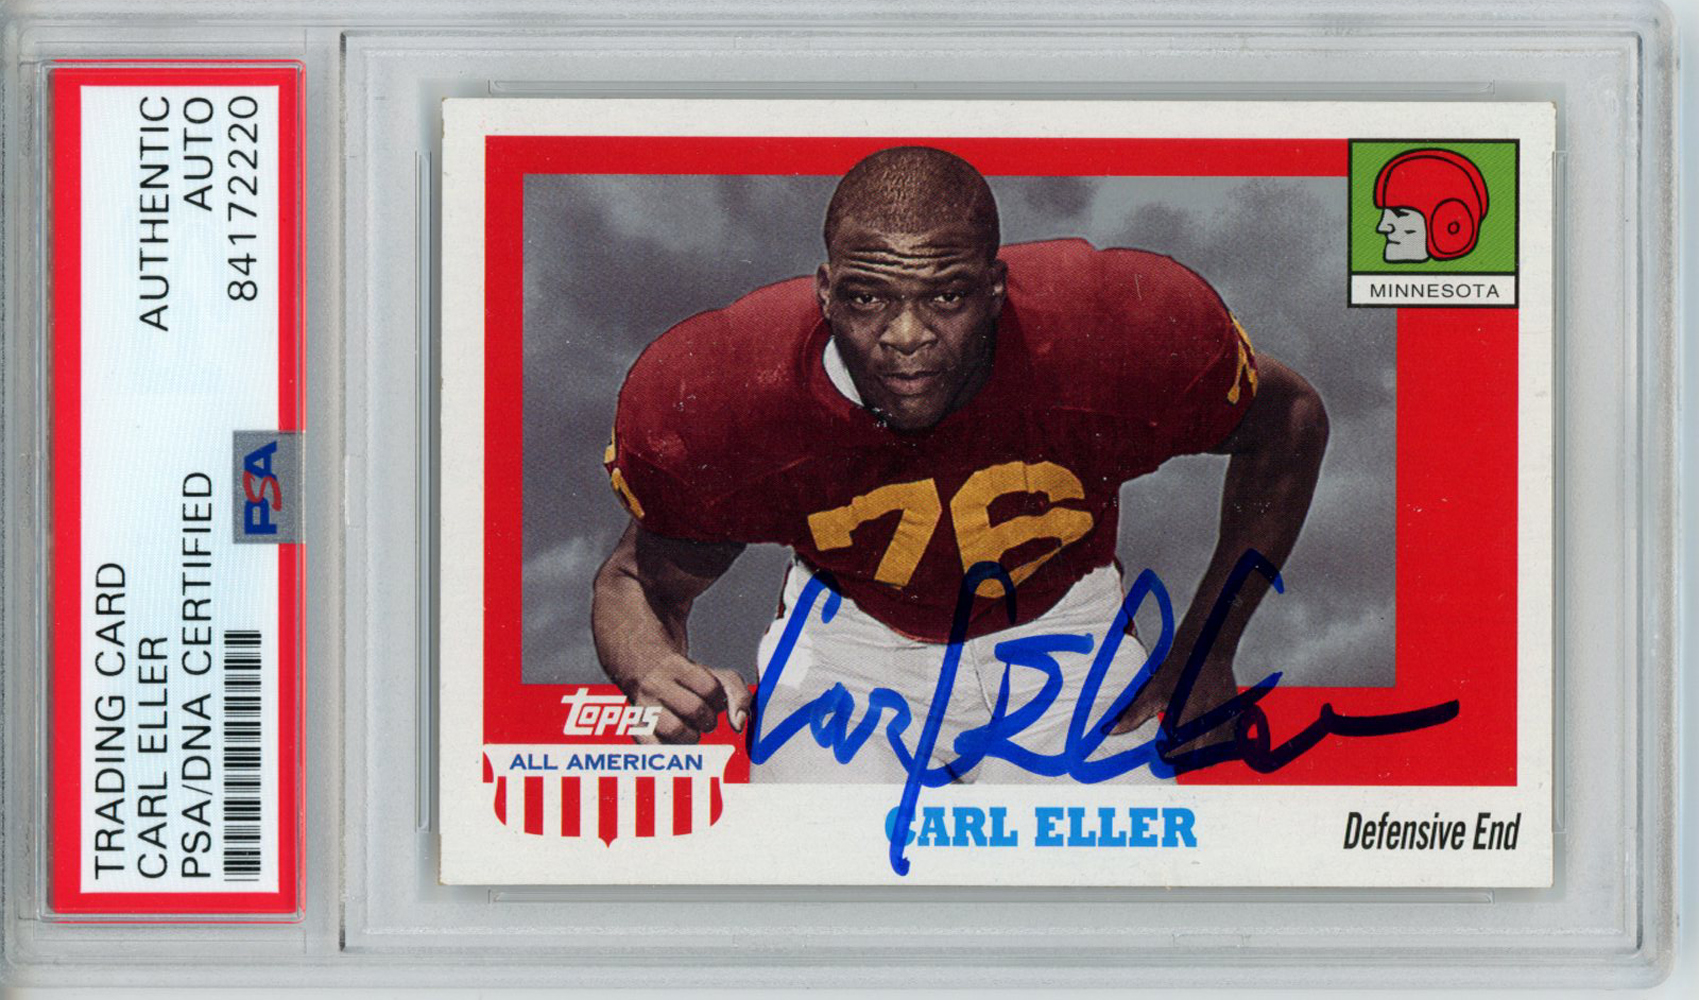 Carl Eller Autographed 2005 Topps All American Trading Card PSA Slab 32582